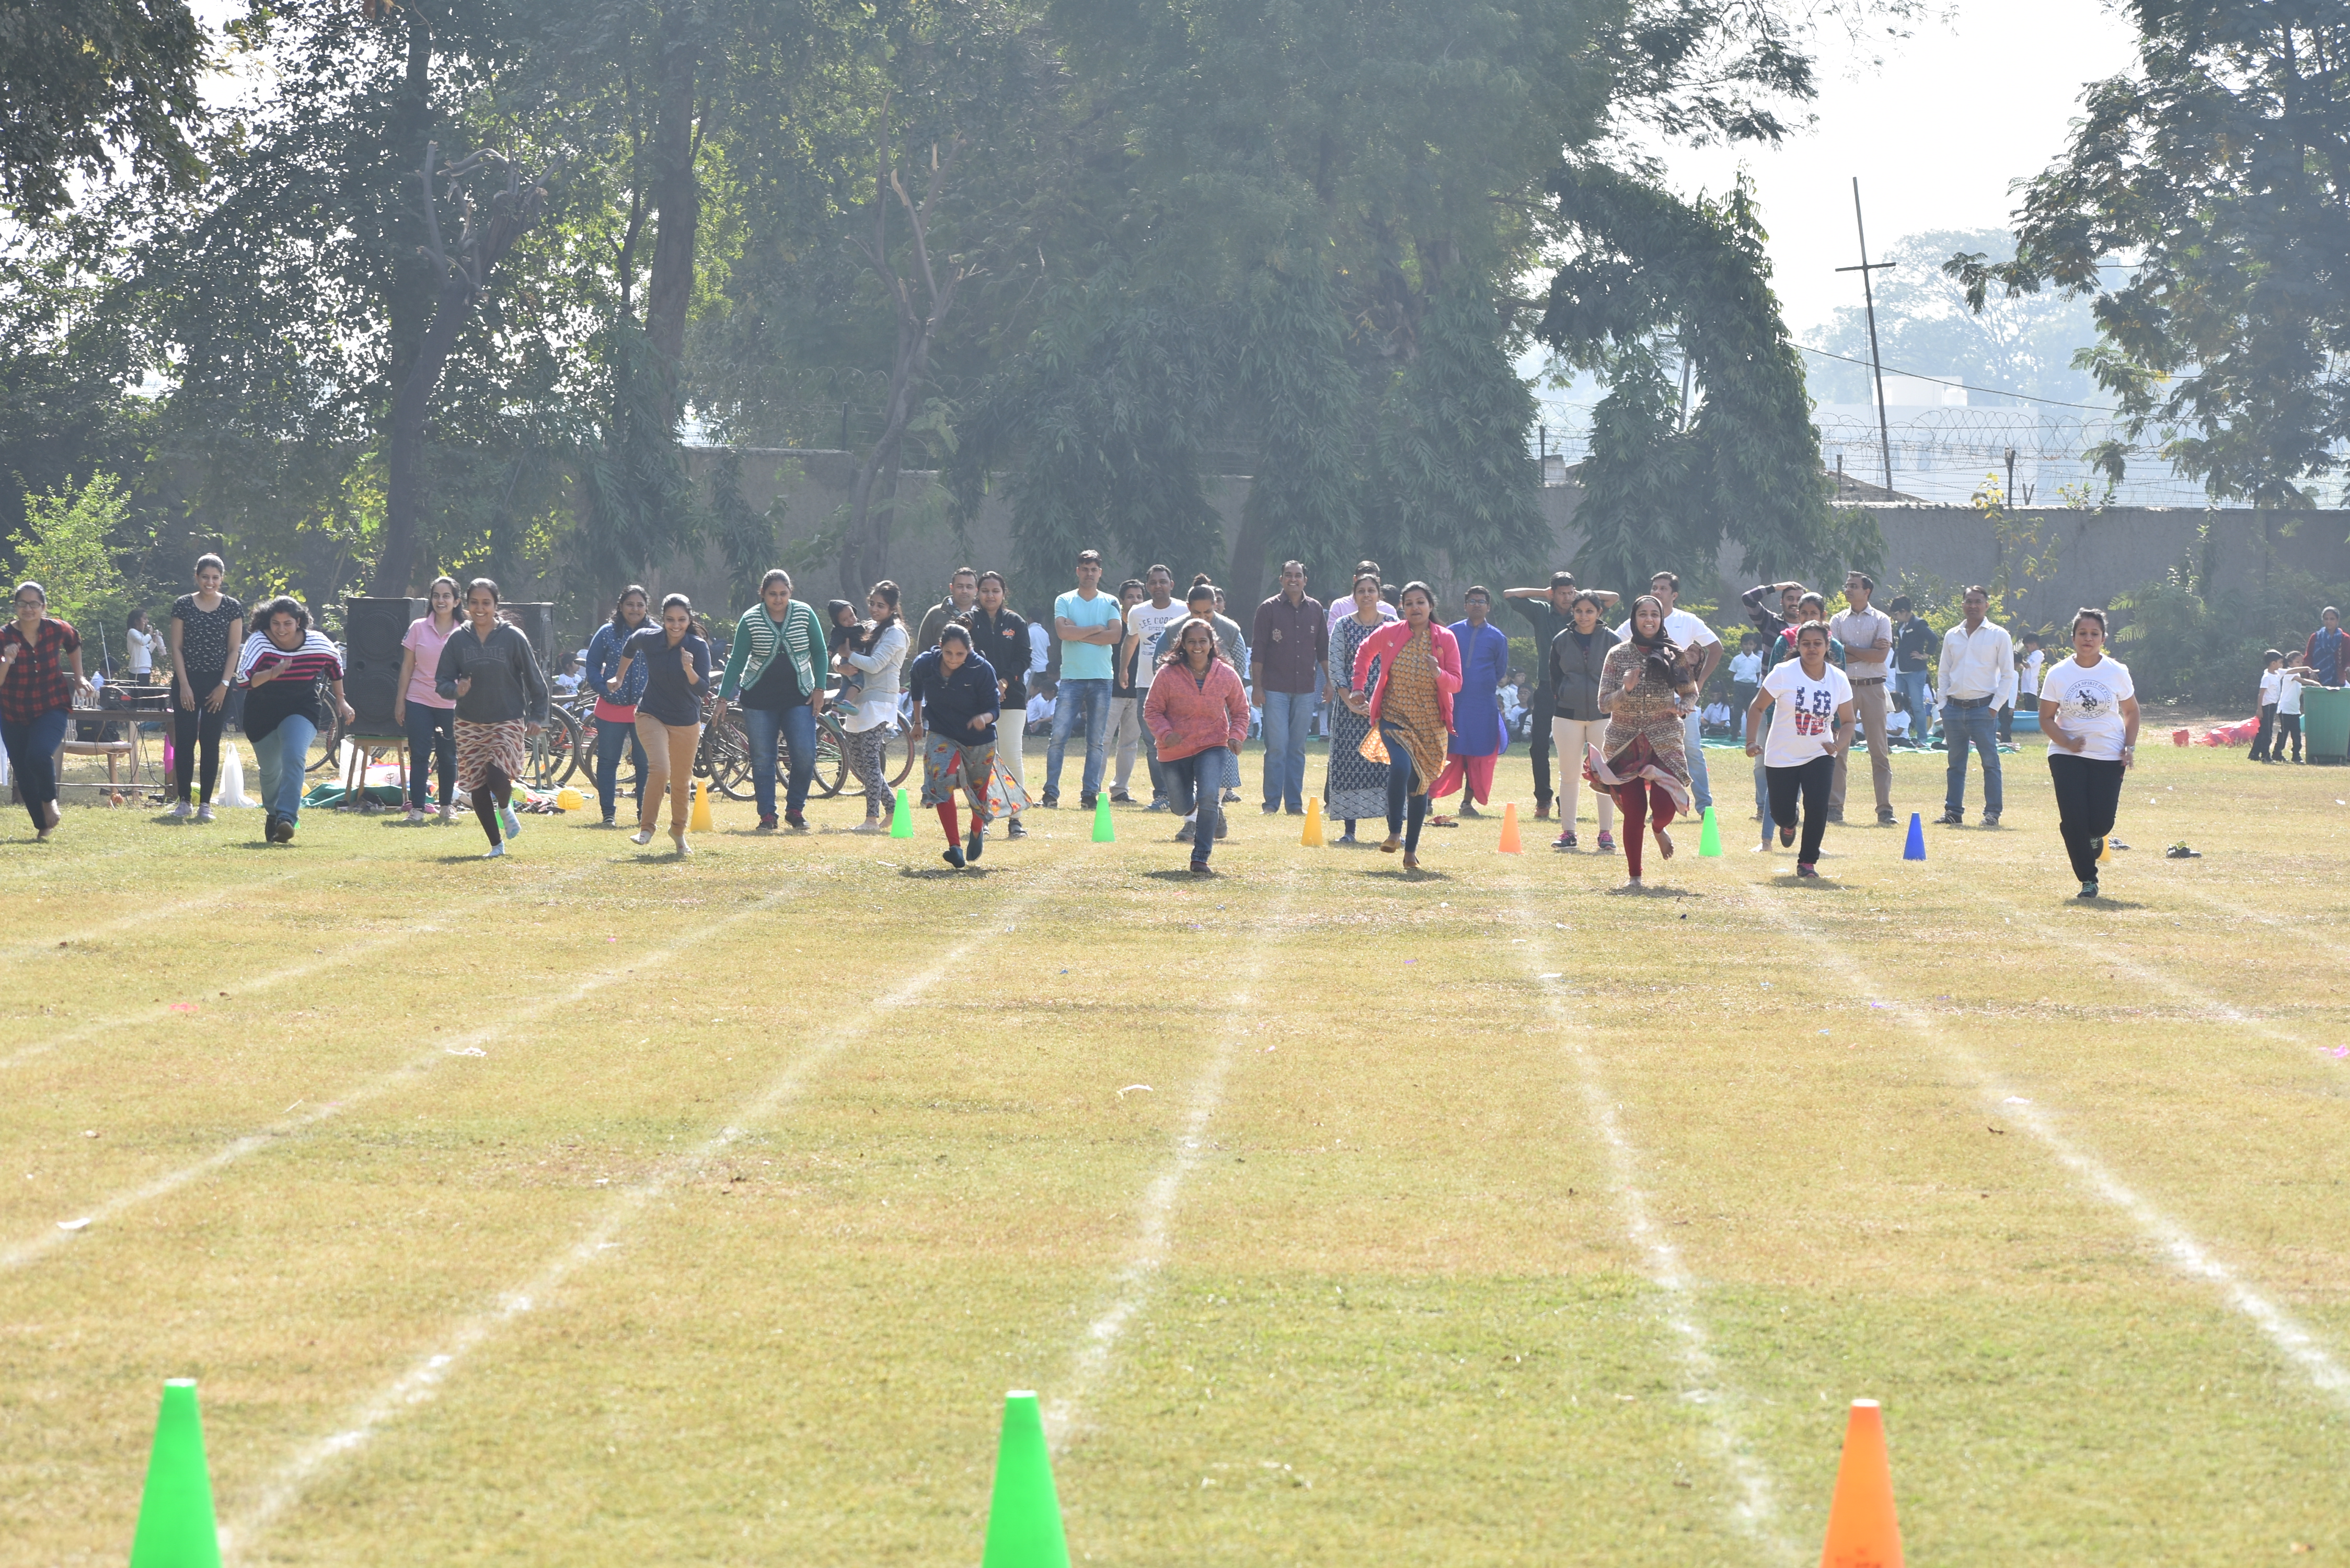 KG - Sports Day<br />
11-1-19